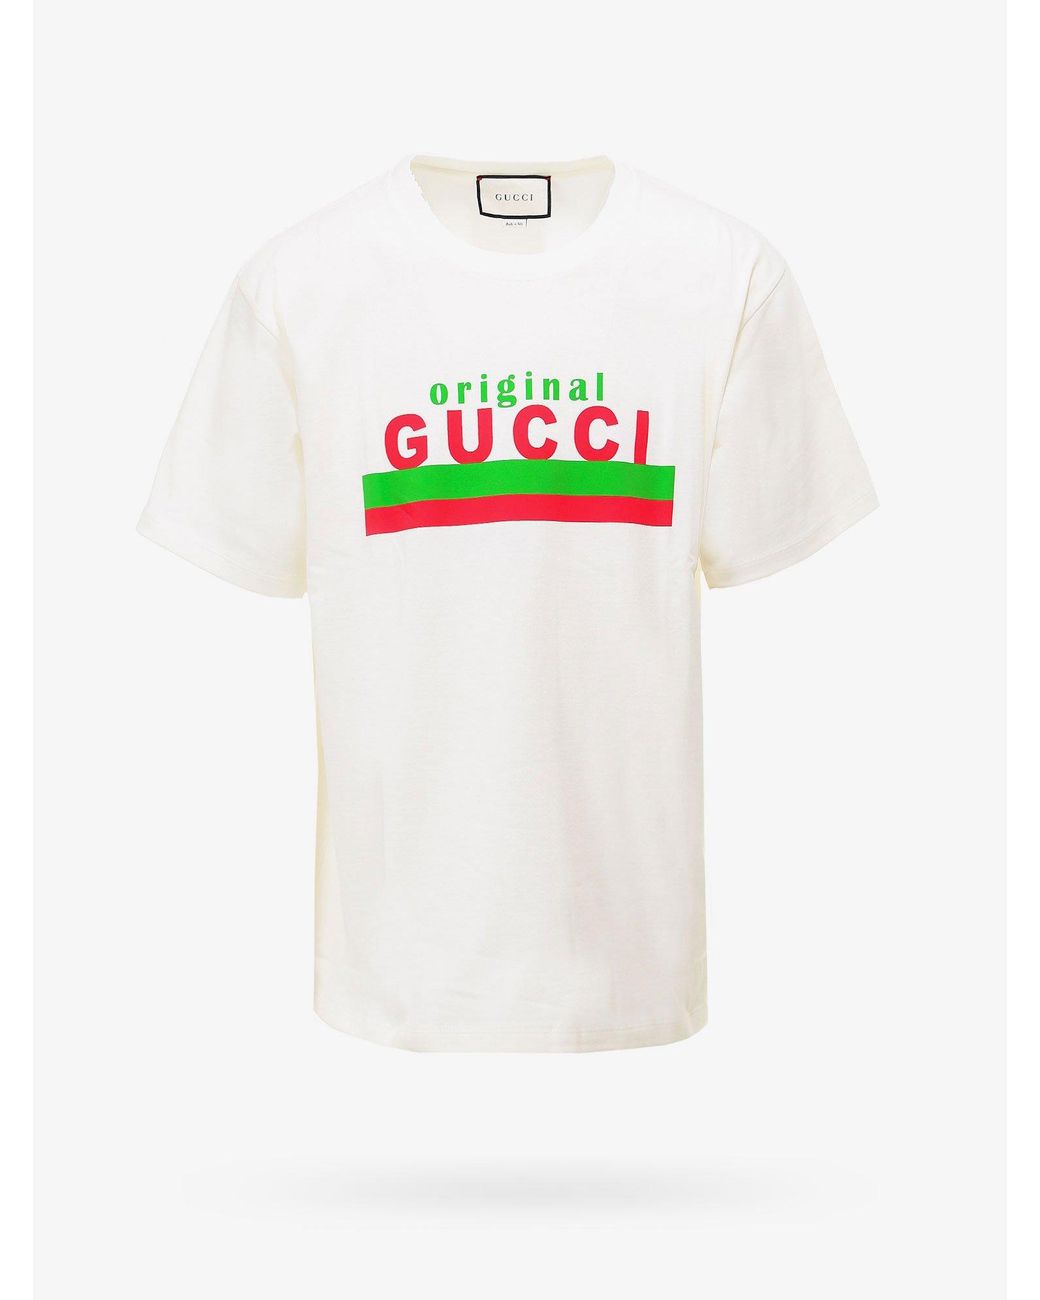 Gucci Cotton T-shirt in White for Men - Lyst